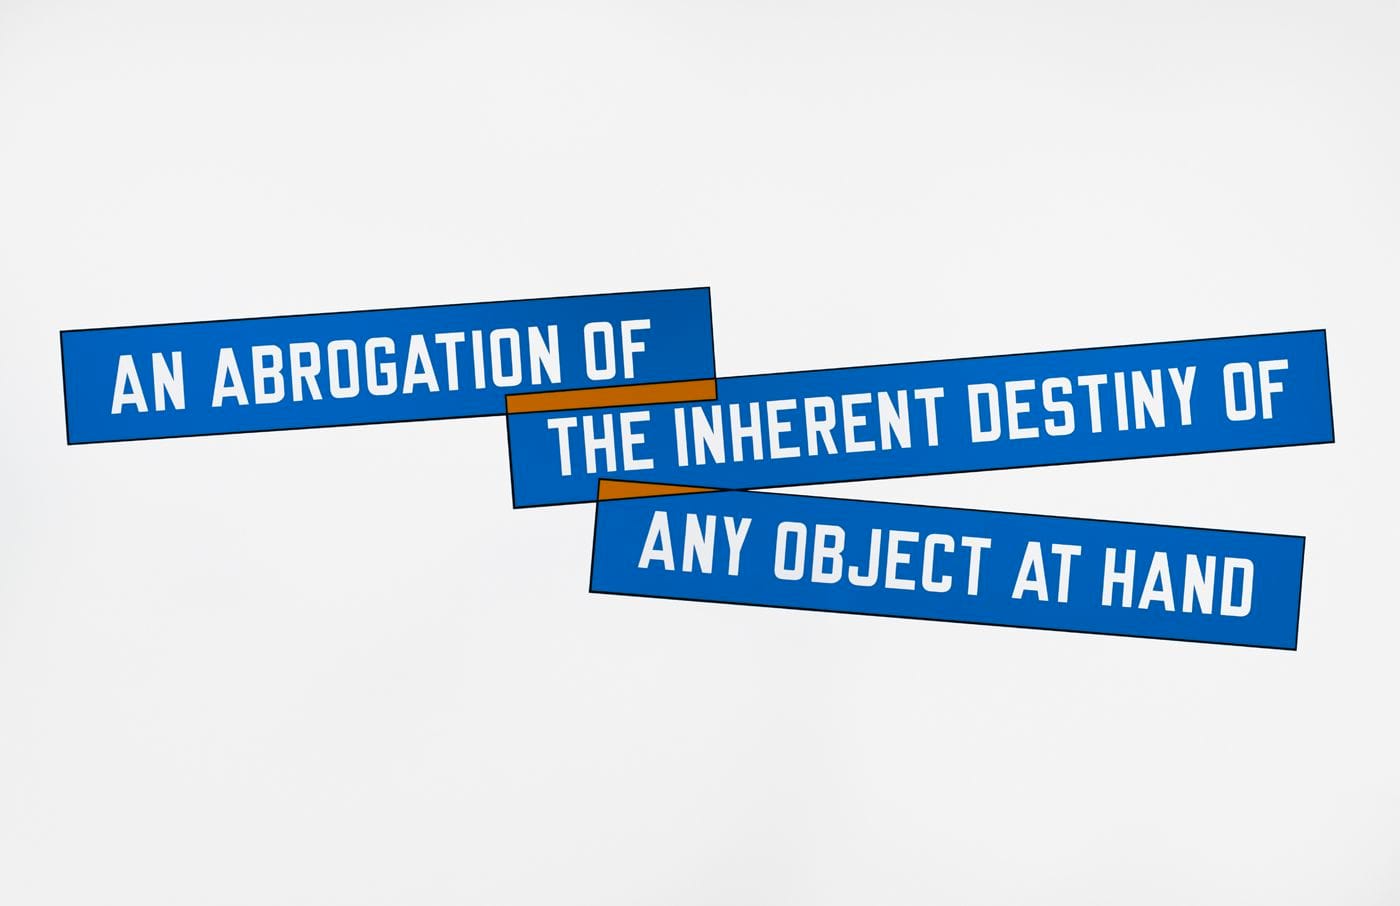 Wall text in three blue boxes in white font read from left to right "AN ABROGATION OF" "THE INHERENT DESTINY OF" "ANY OBJECT AT HAND".